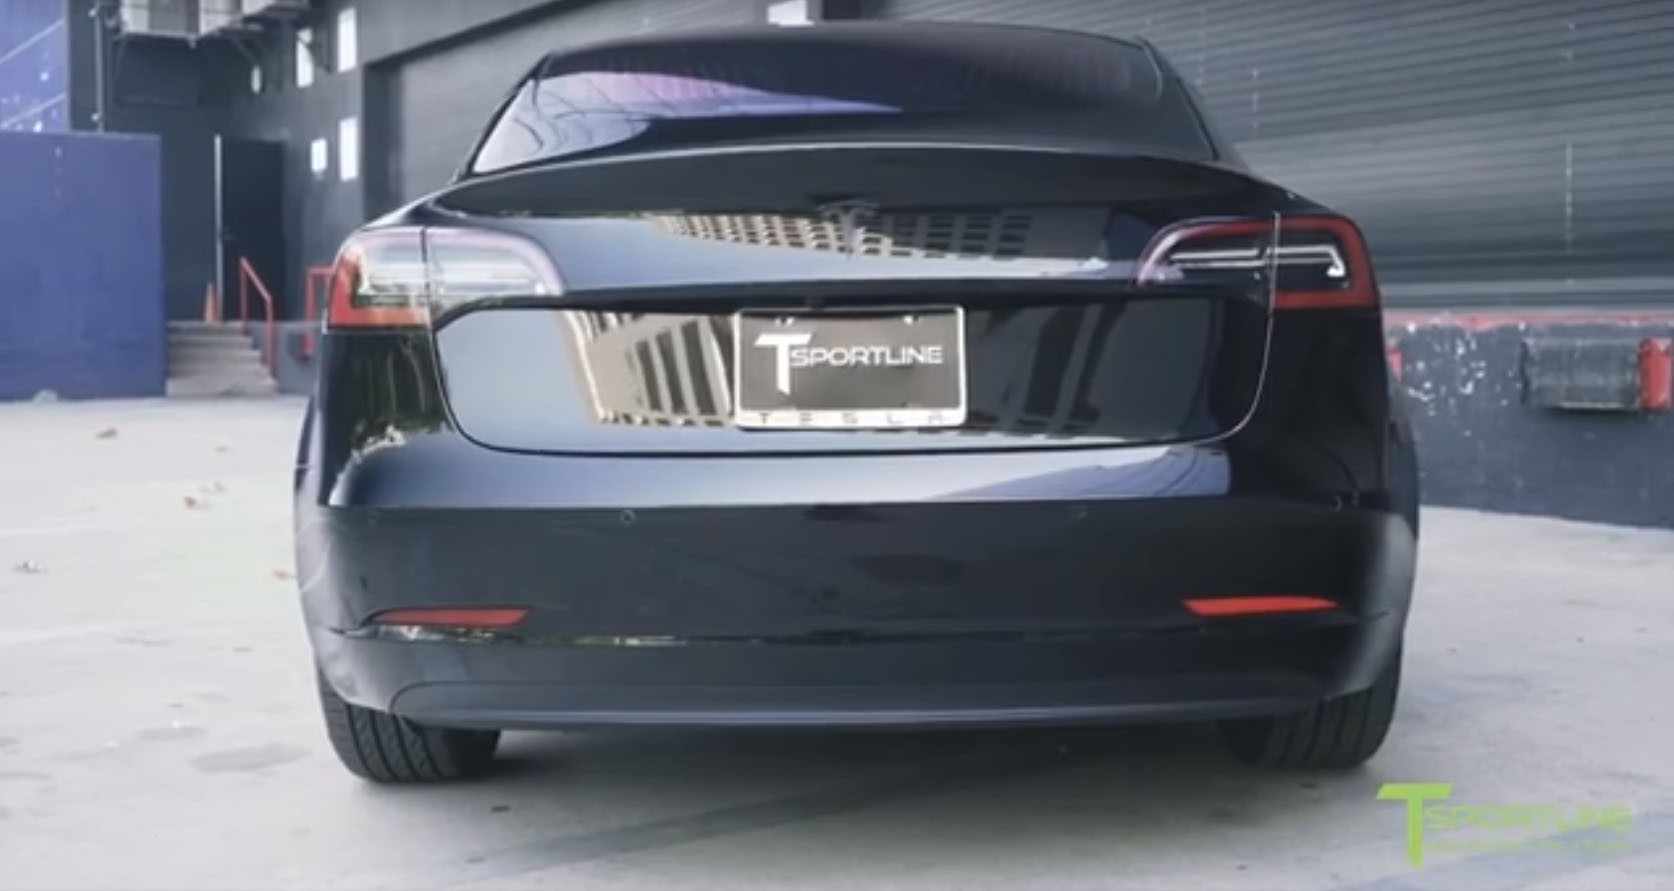 blacked out tesla model 3 looks set to do a drive by shooting